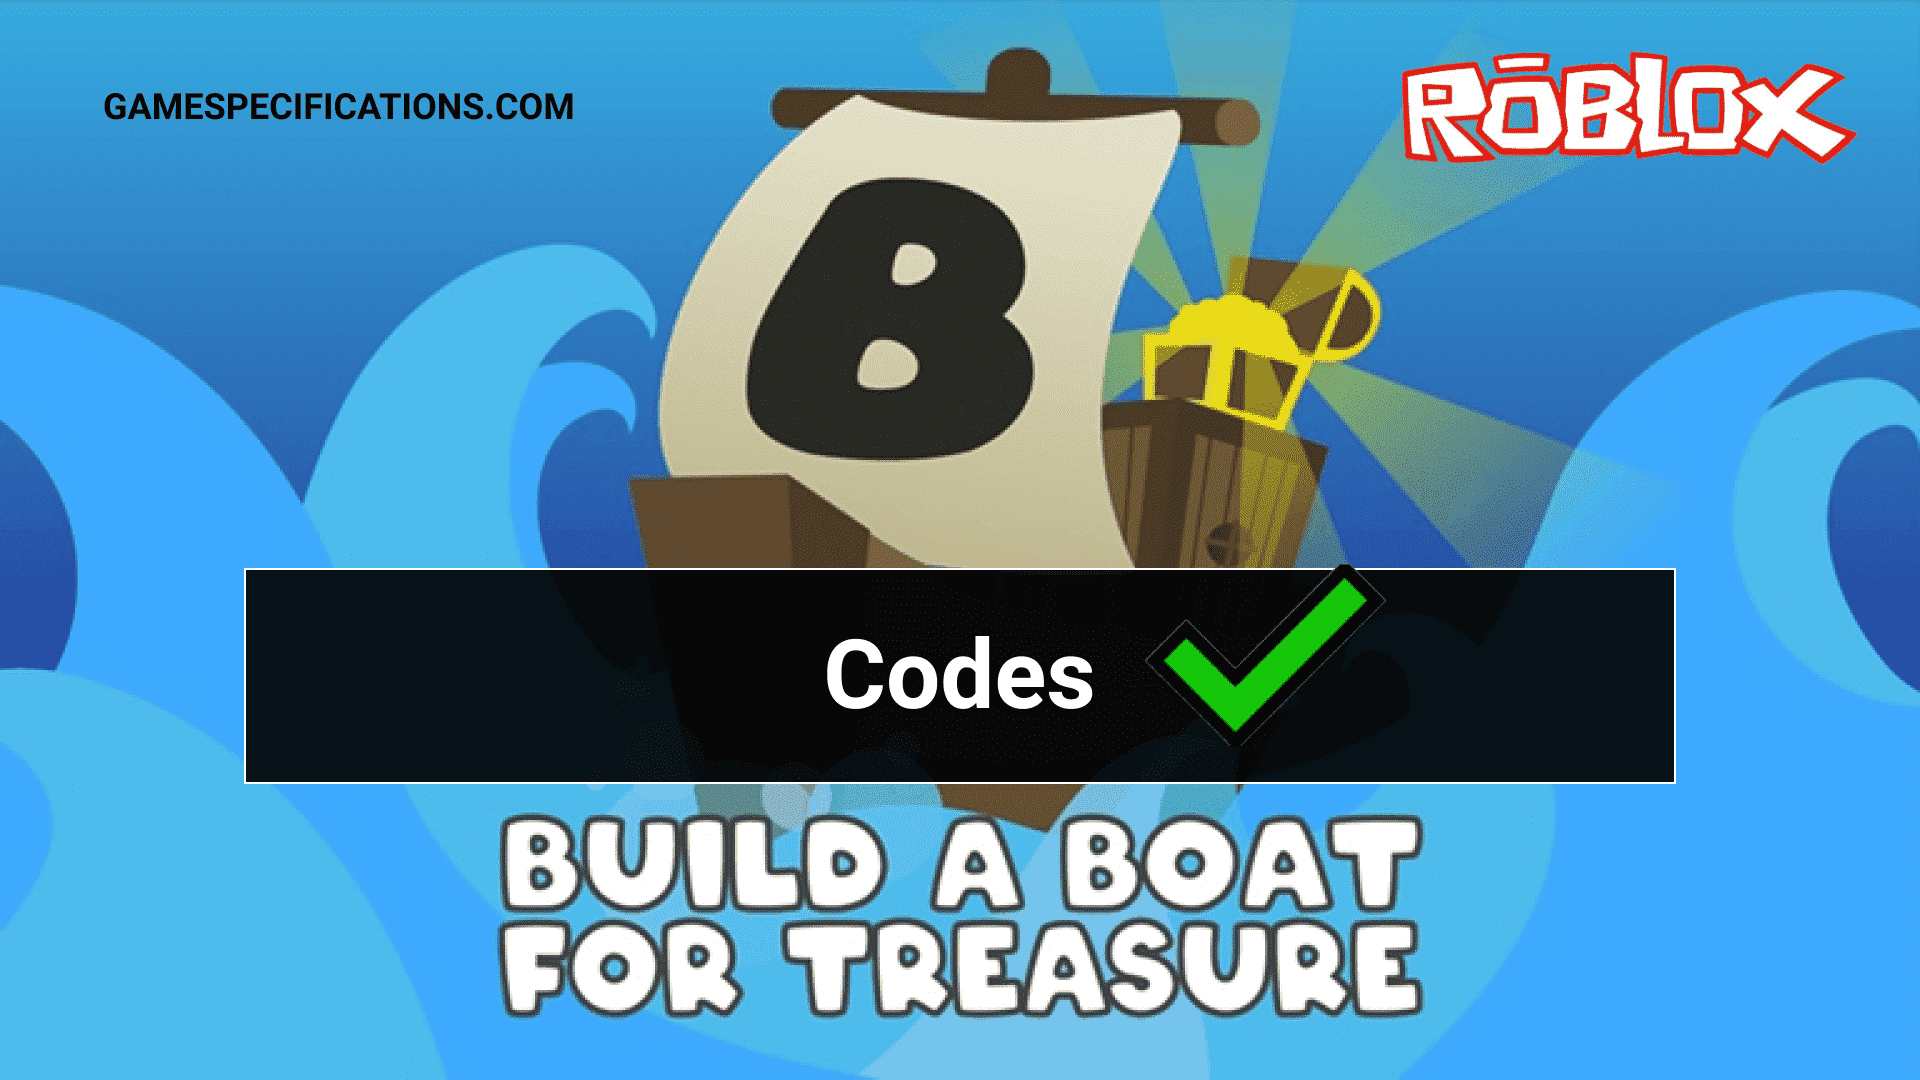 Roblox Build A Boat For Treasure Codes July 2021 Game Specifications - roblox text cake code